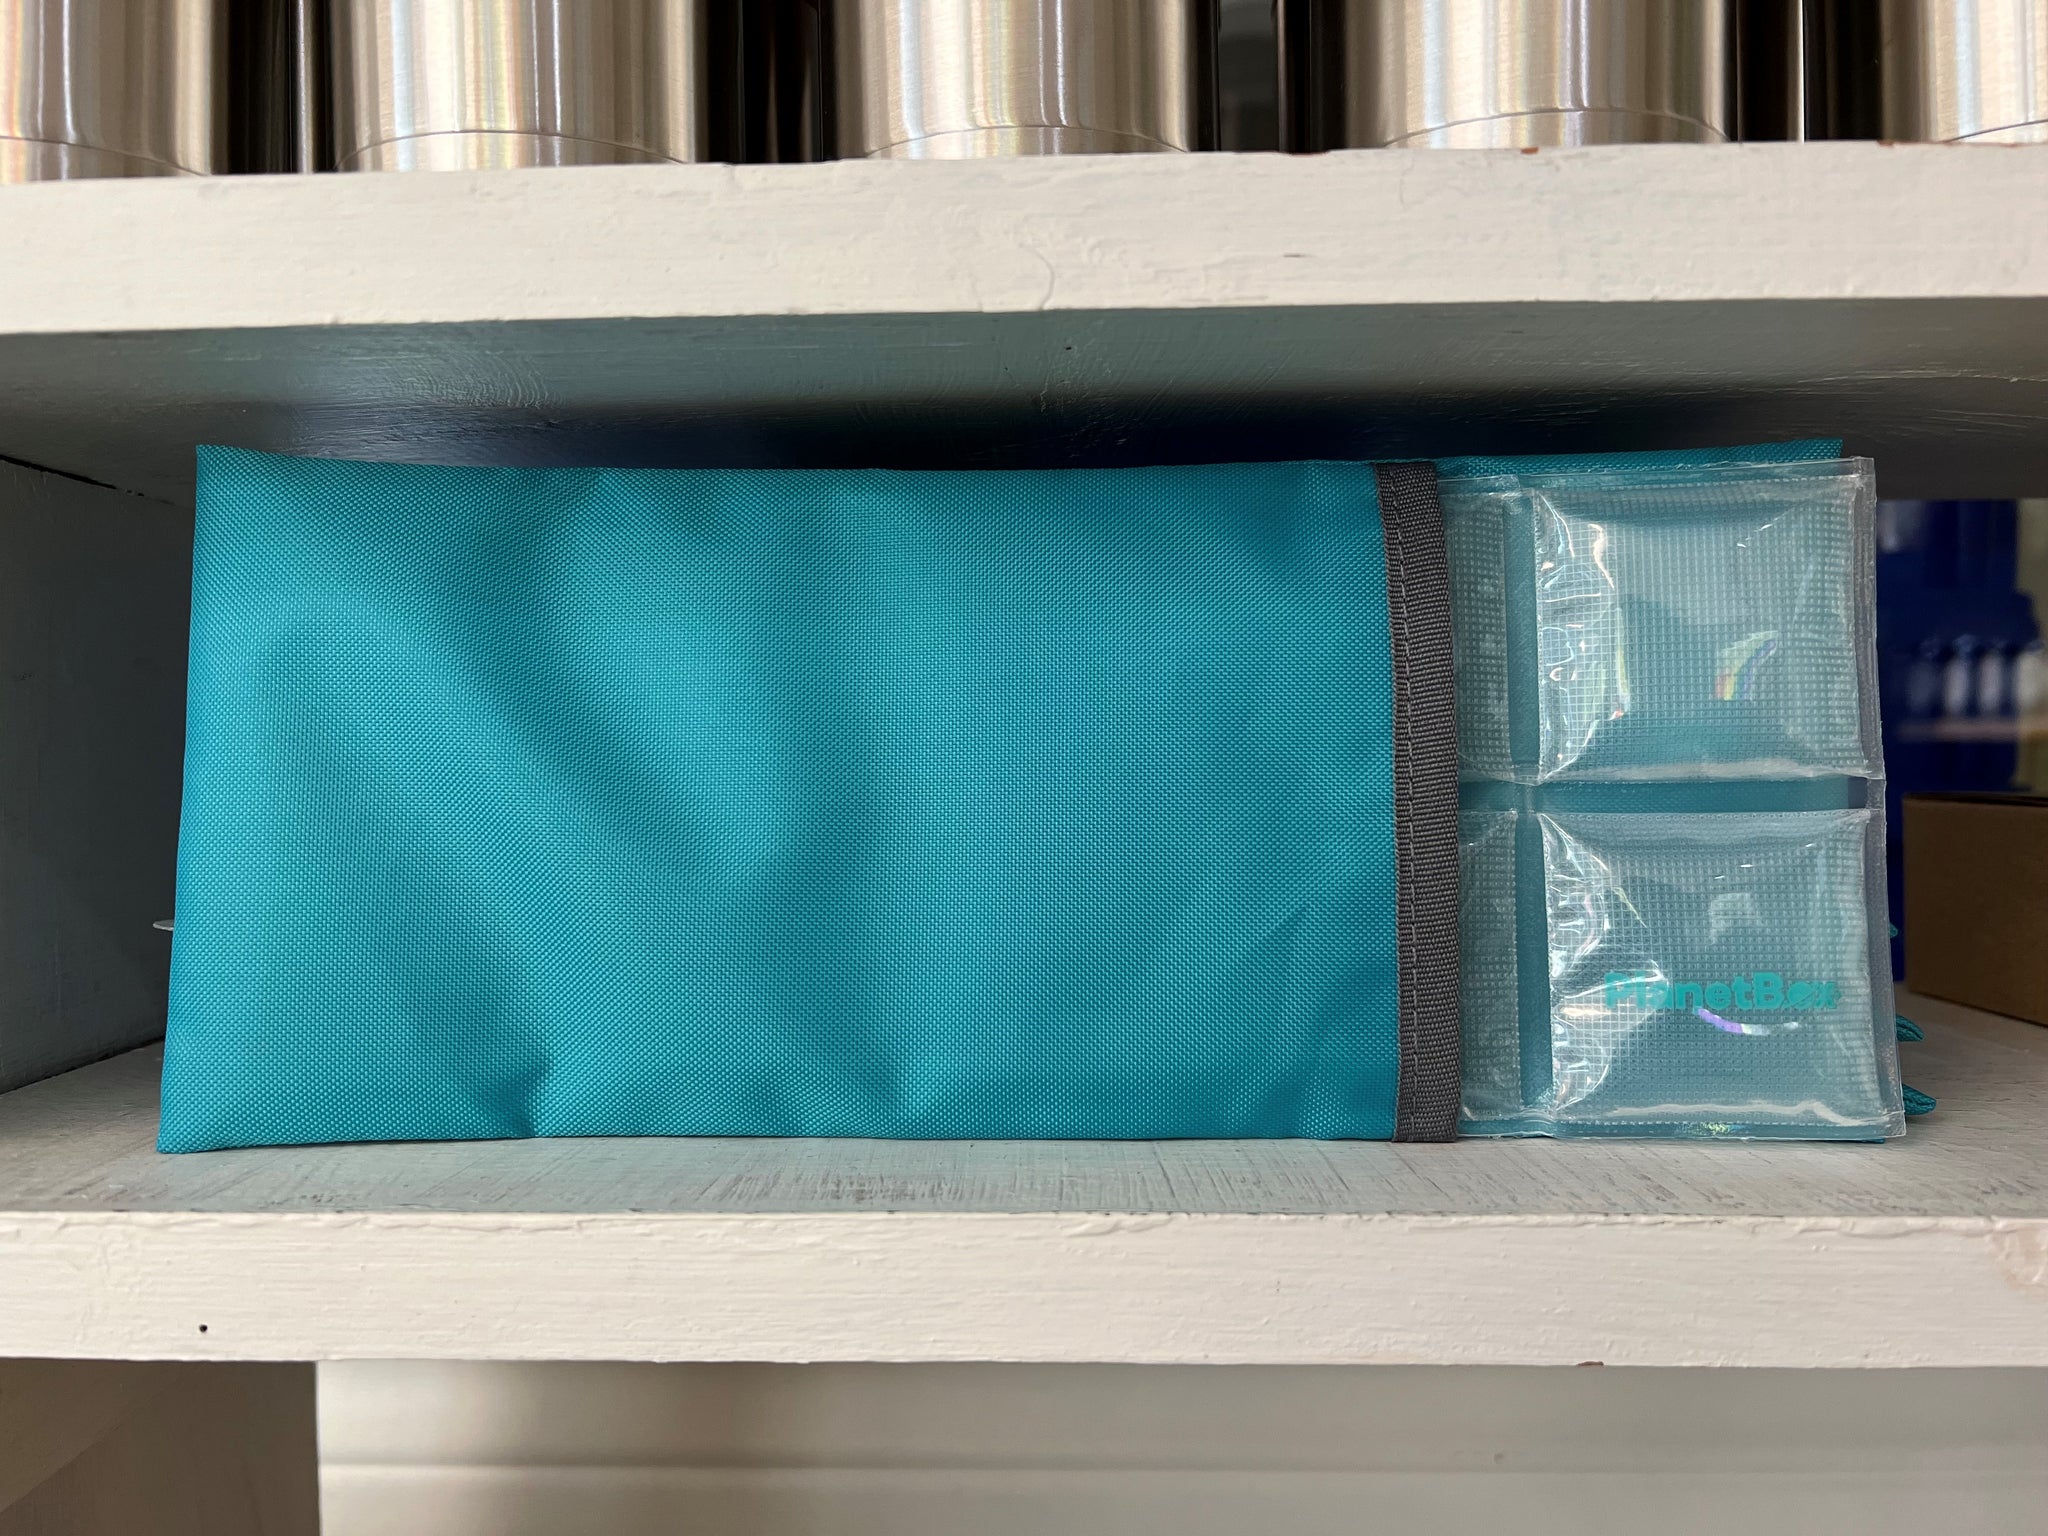 PlanetBox COLDKIT Ice Pack, Teal